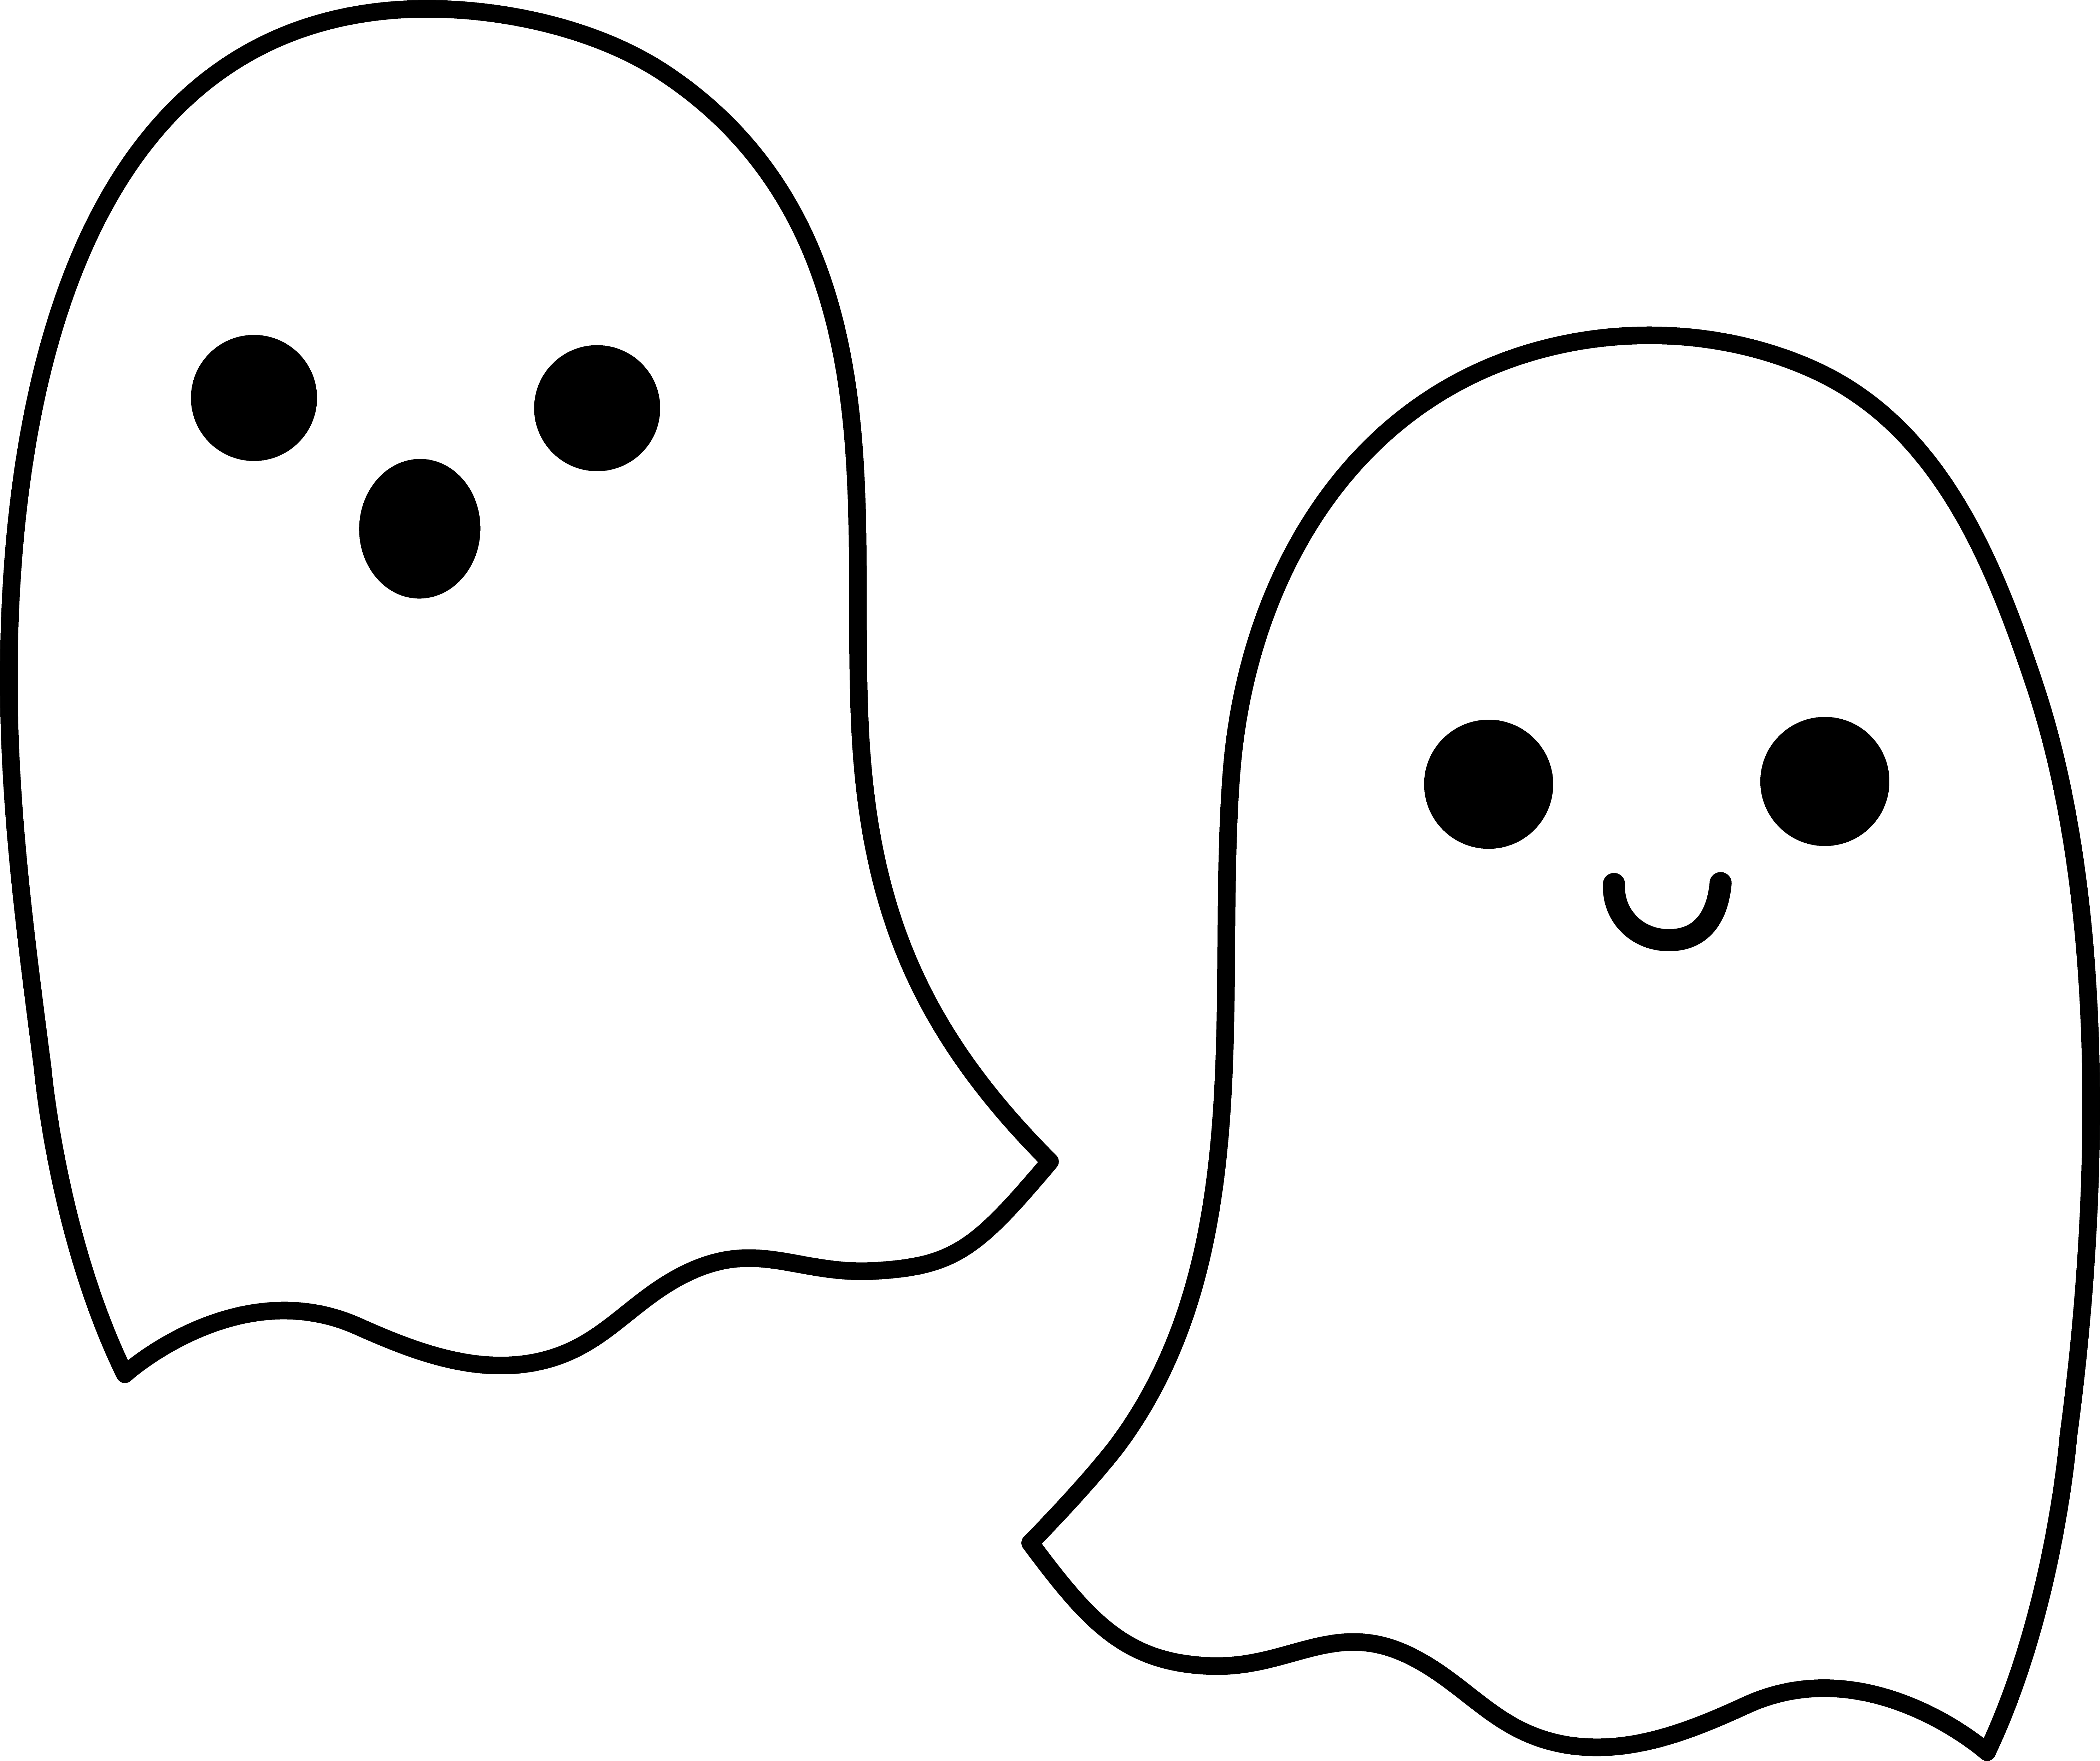 Free Halloween Ghosts Picture, Download Free Clip Art, Free Clip Art on Clipart Library